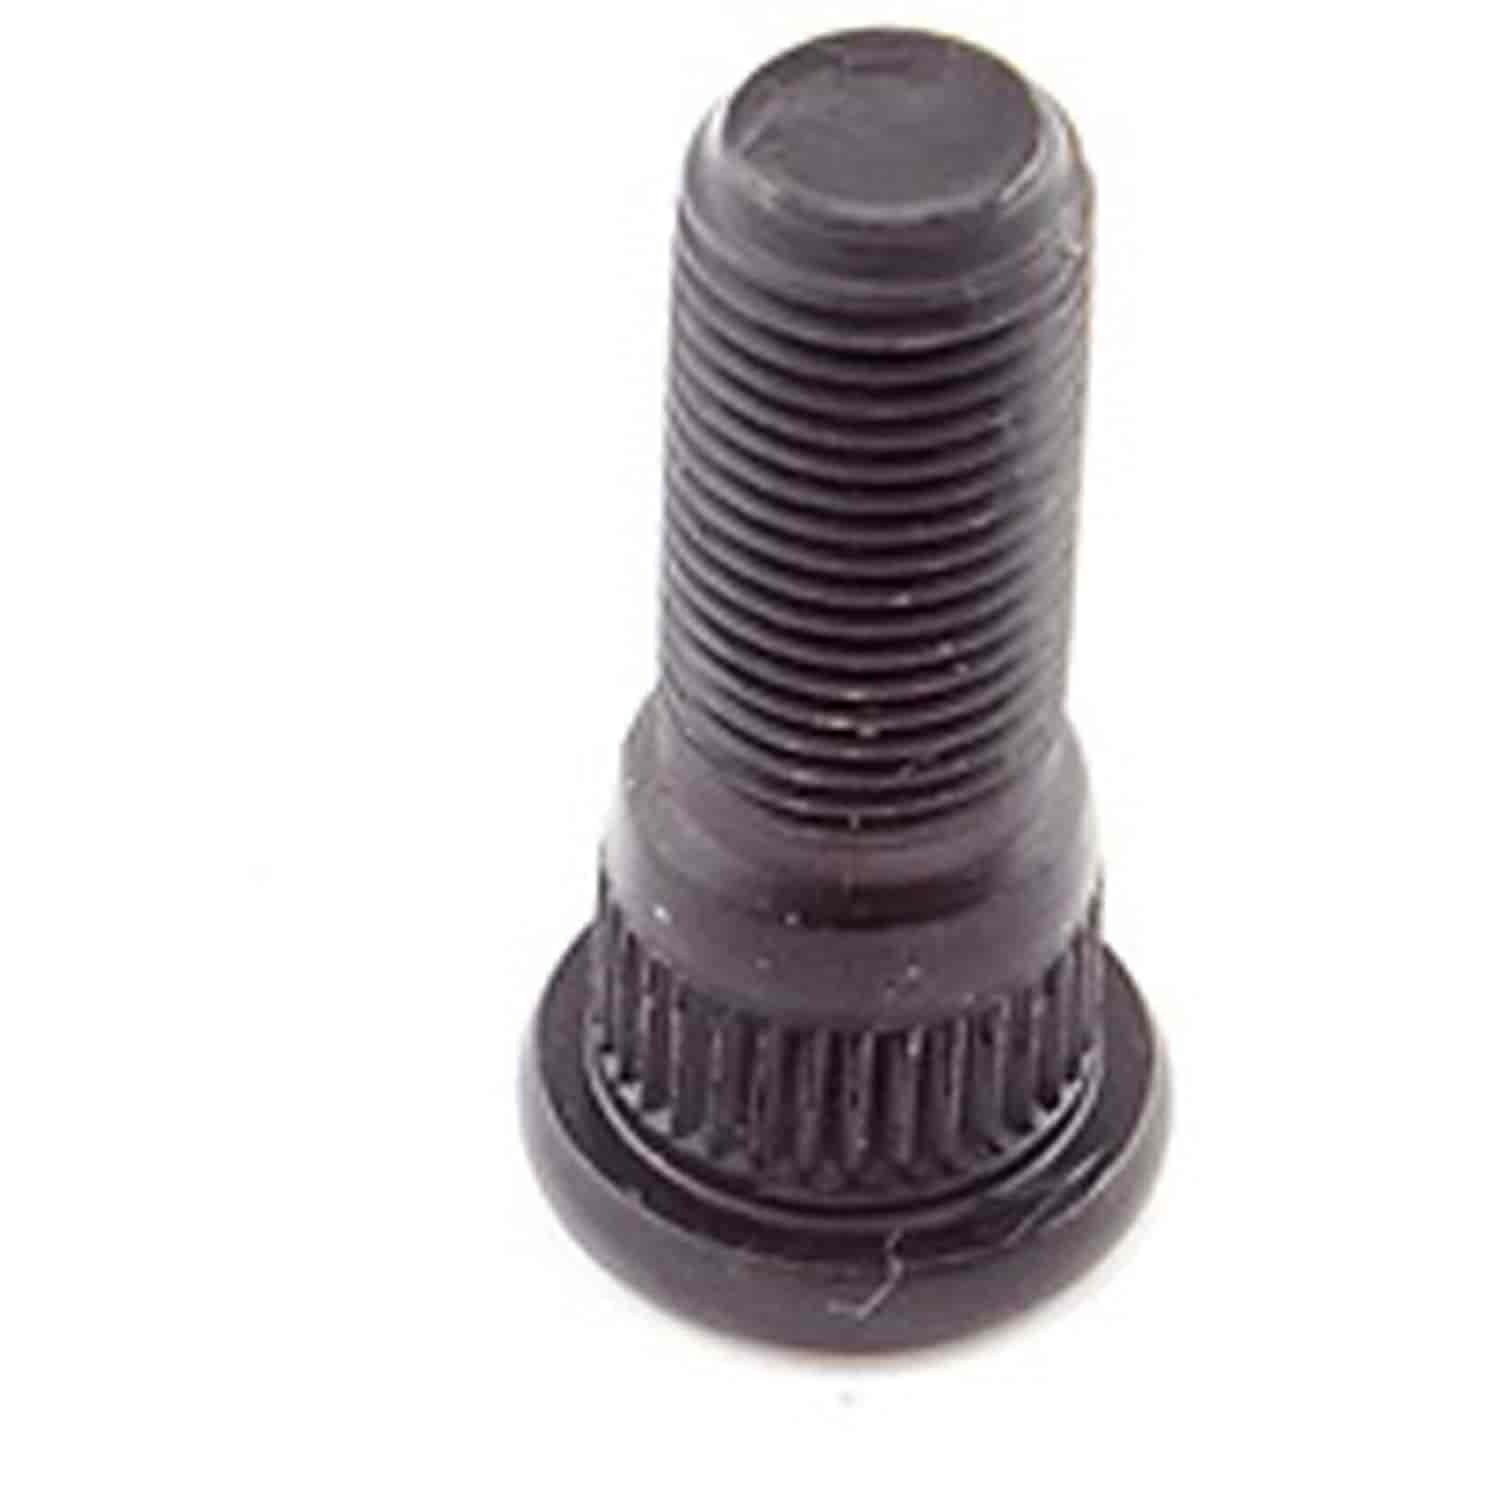 Replacement wheel stud from Omix-ADA, Fits rear axle shafts on 01-02 Jeep Wrangler TJ